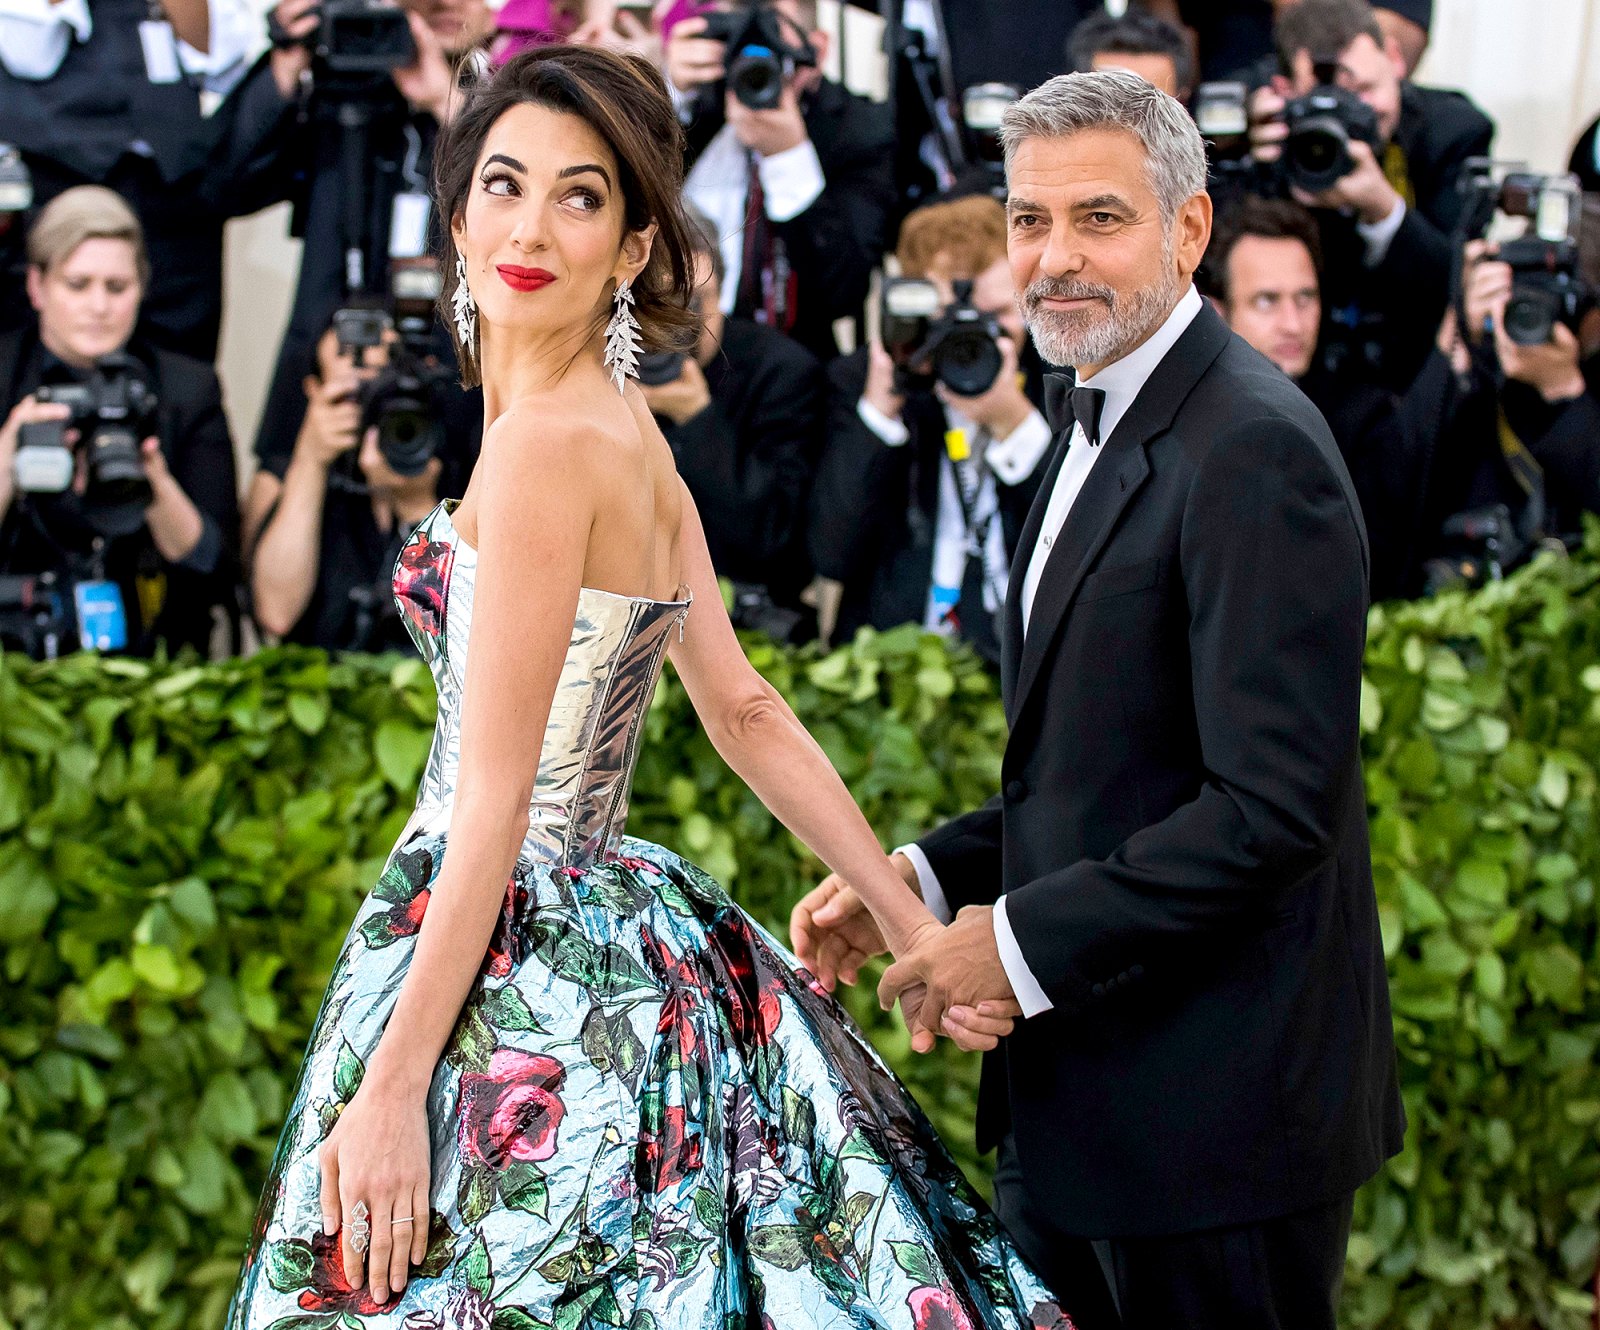 George-Clooney-gushes-over-Amal-Clooney